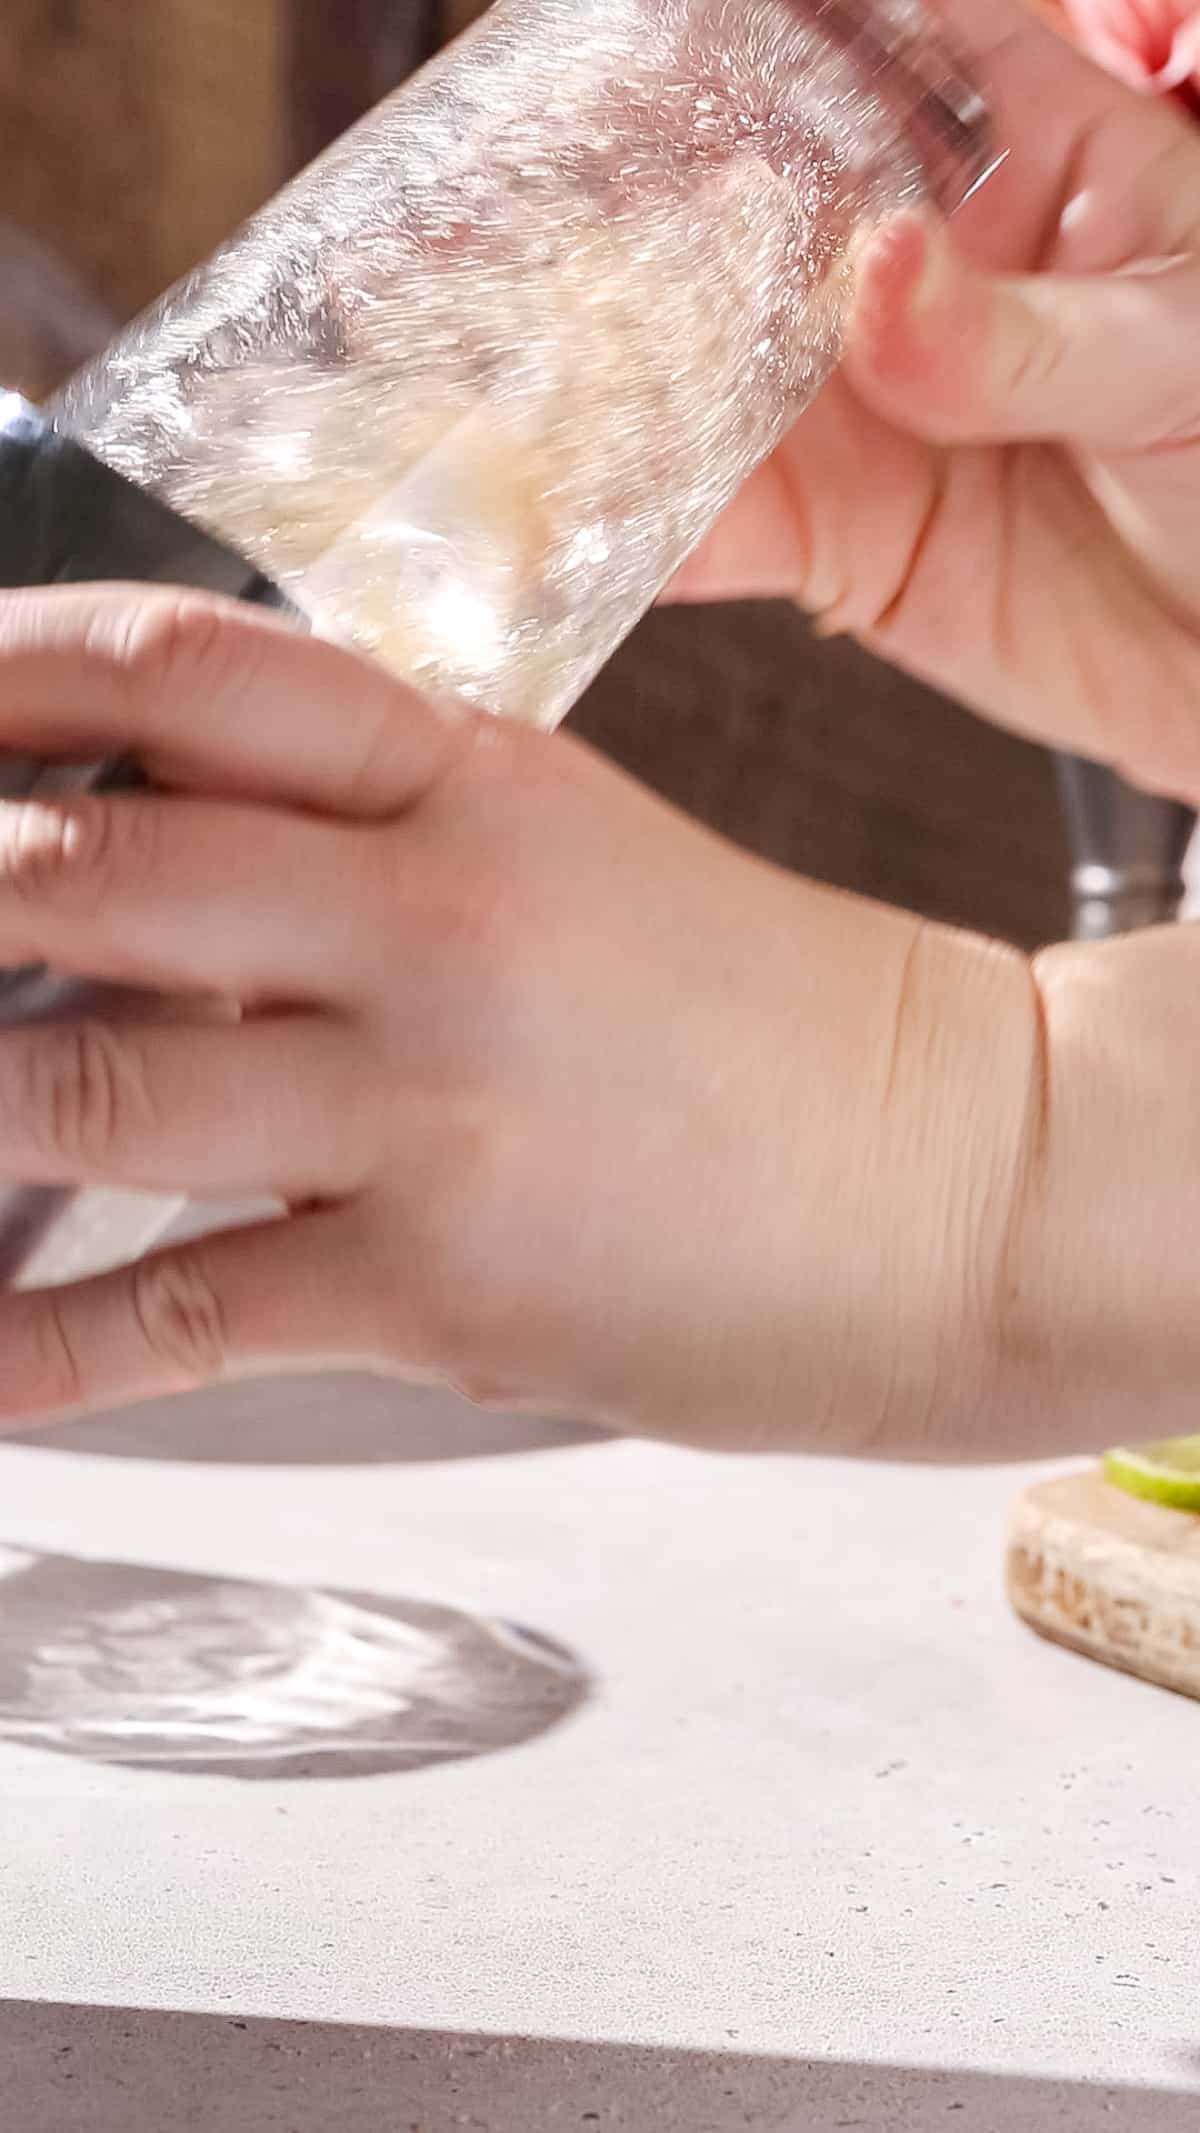 Hands shaking up a cocktail in a glass and metal shaker.